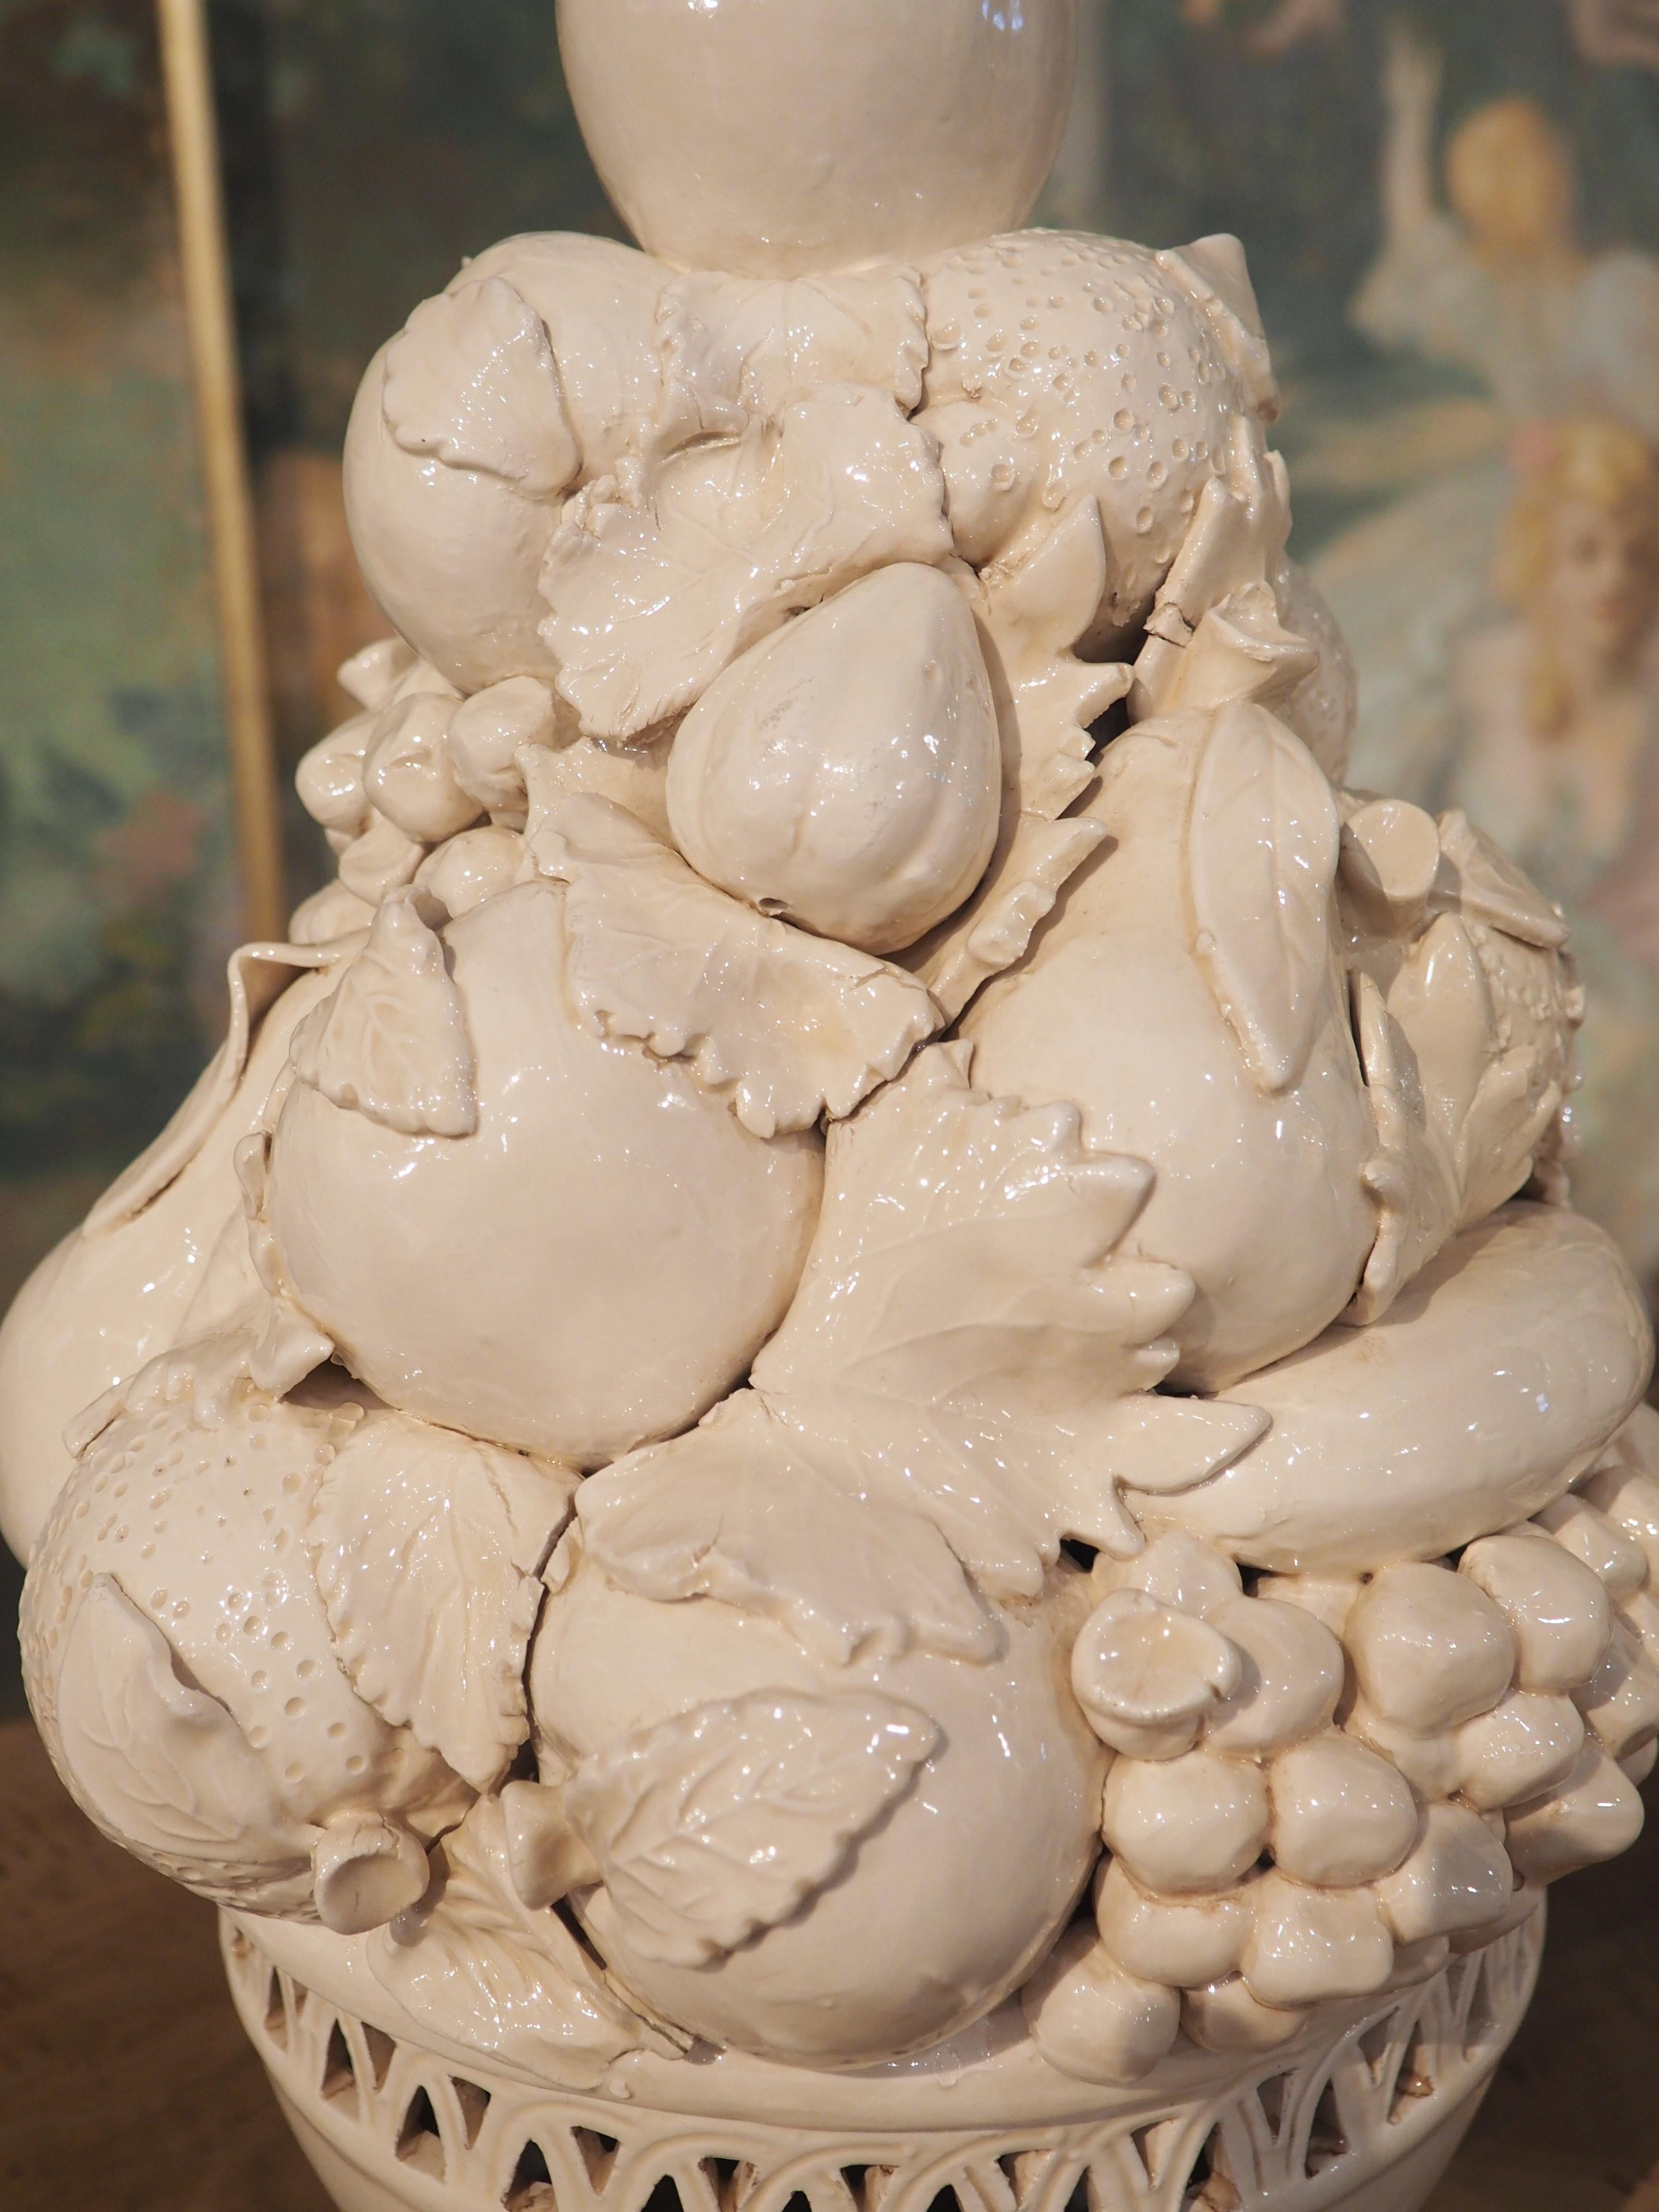 A very realistic rendering of a tower of fruit, this pair of creamware topiaries was produced in Italy during the 1960s. Creamware is a unique type of earthenware that is fired at lower temperatures (around 800 Celsius) than most other pottery, then